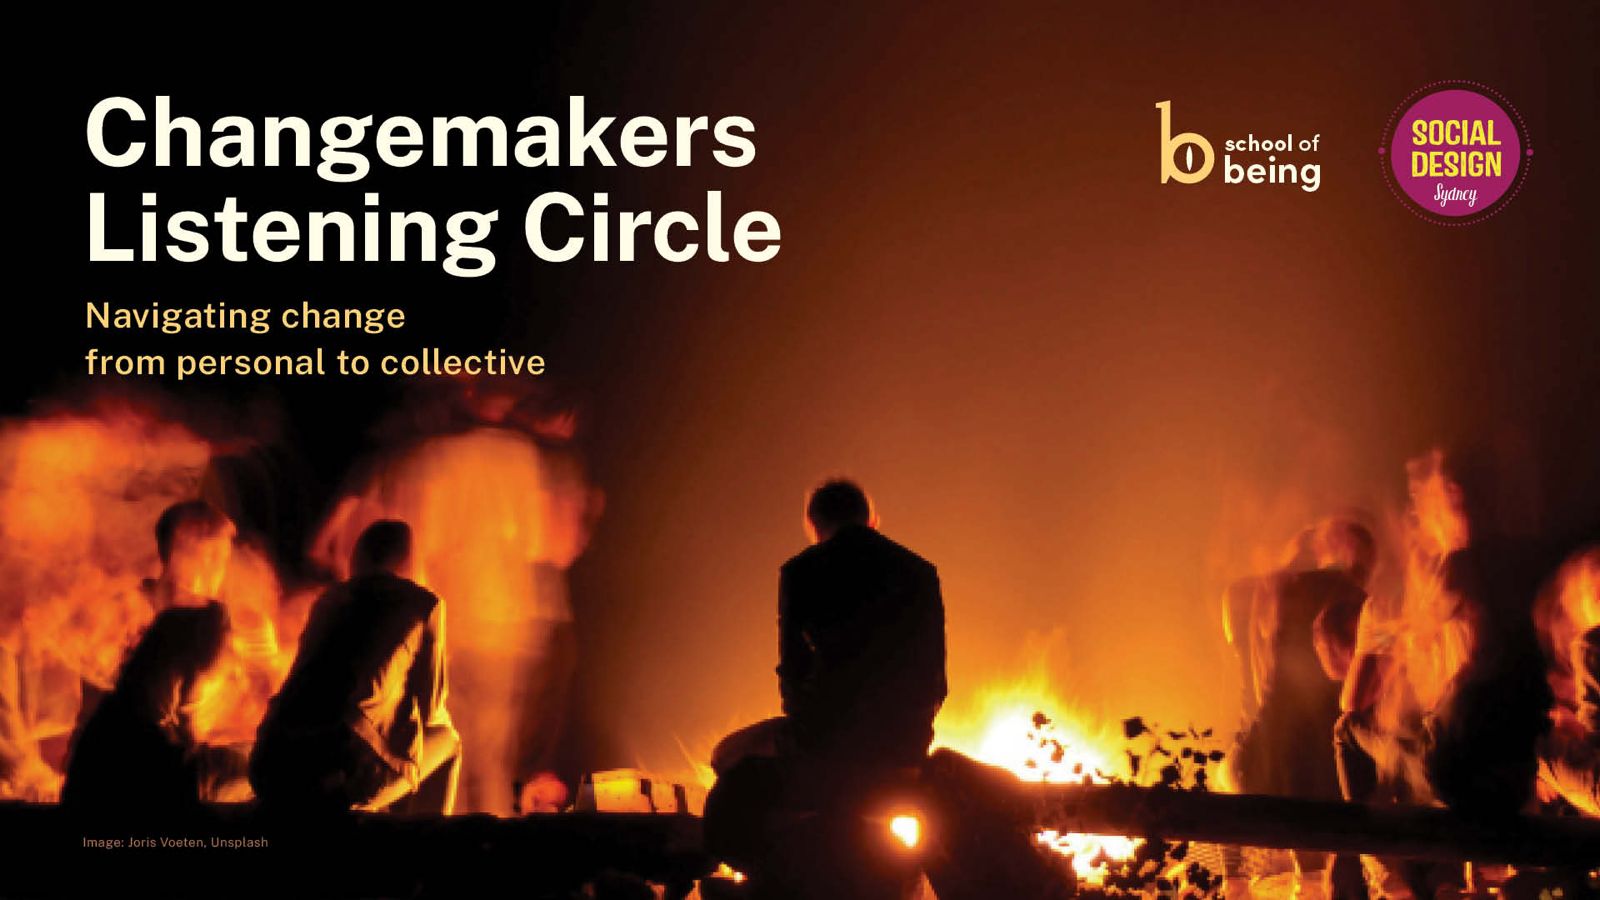 Changemakers Listening Circle : Navigating change from personal to collective text on background with silhouette people around a fire